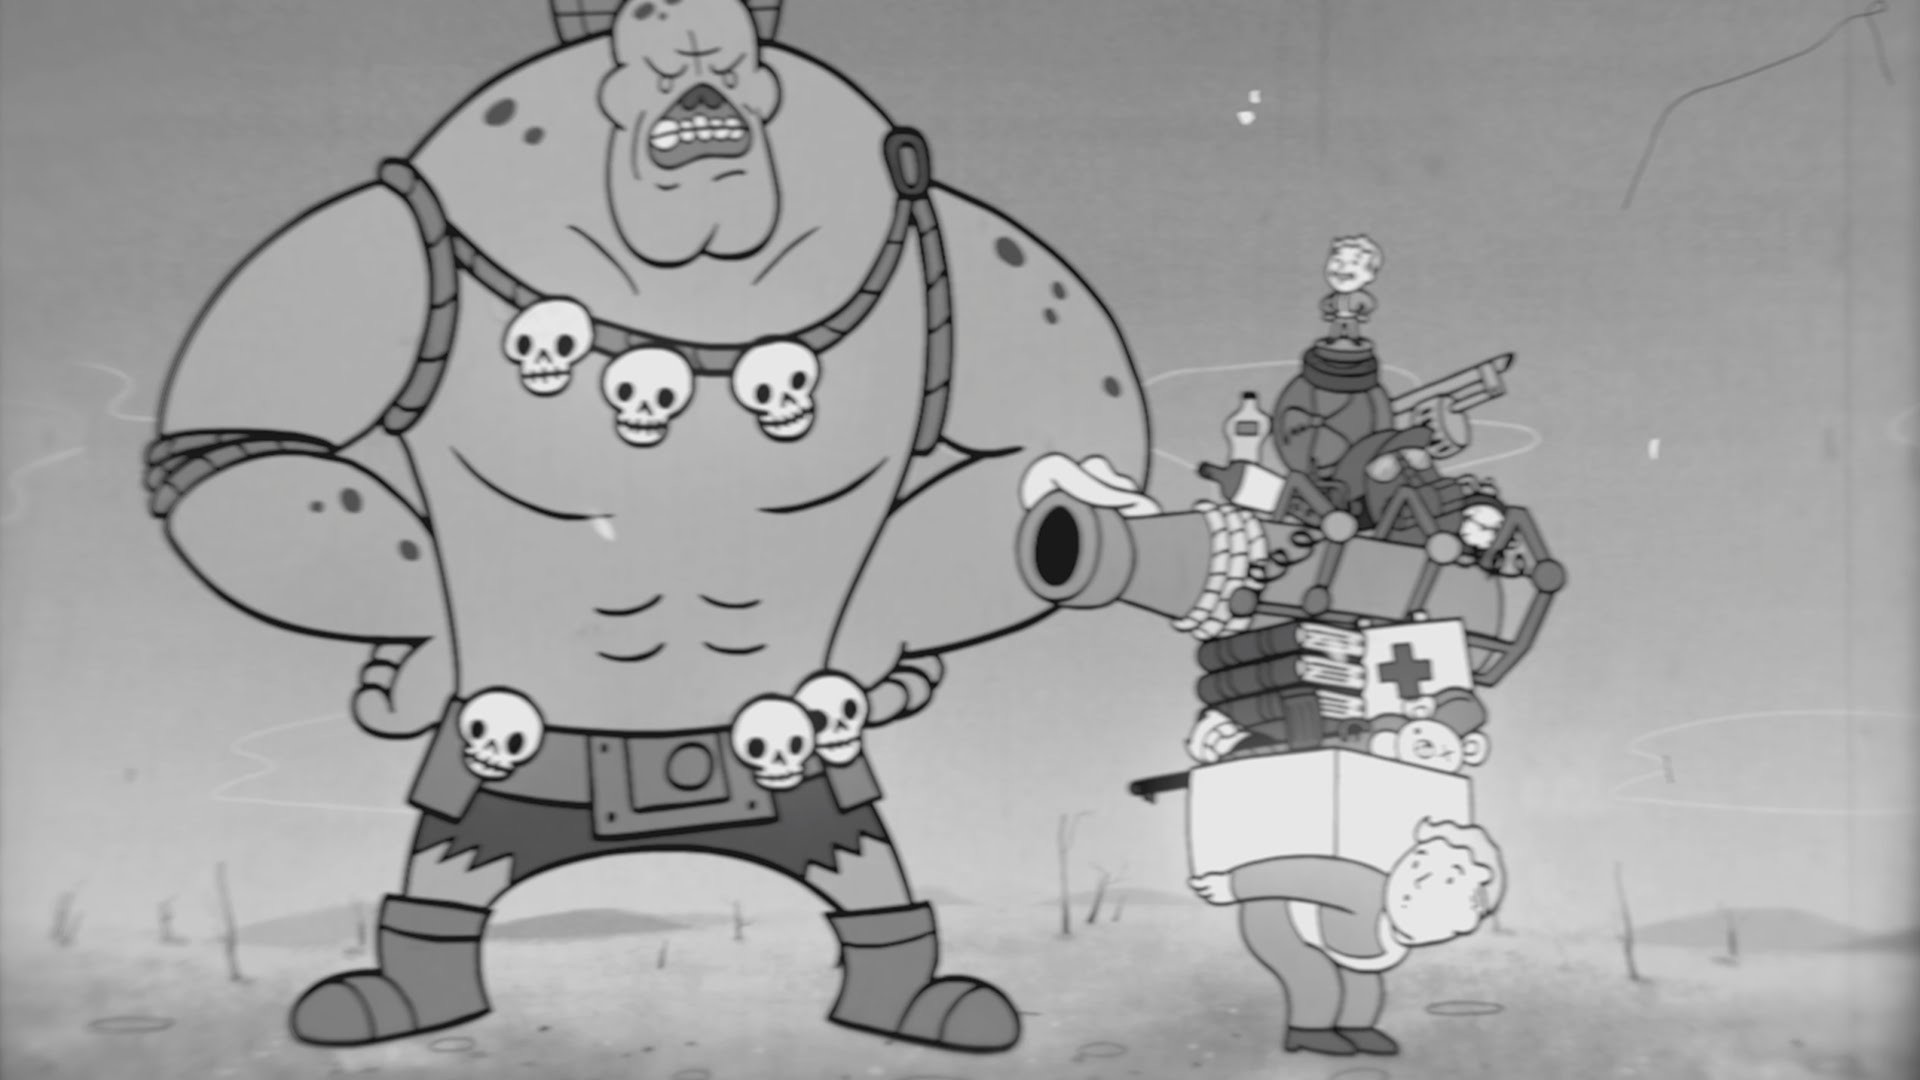 1920x1080 Motionographer Making cute 1950s-style animations for a cruel,  post-apocalyptic world